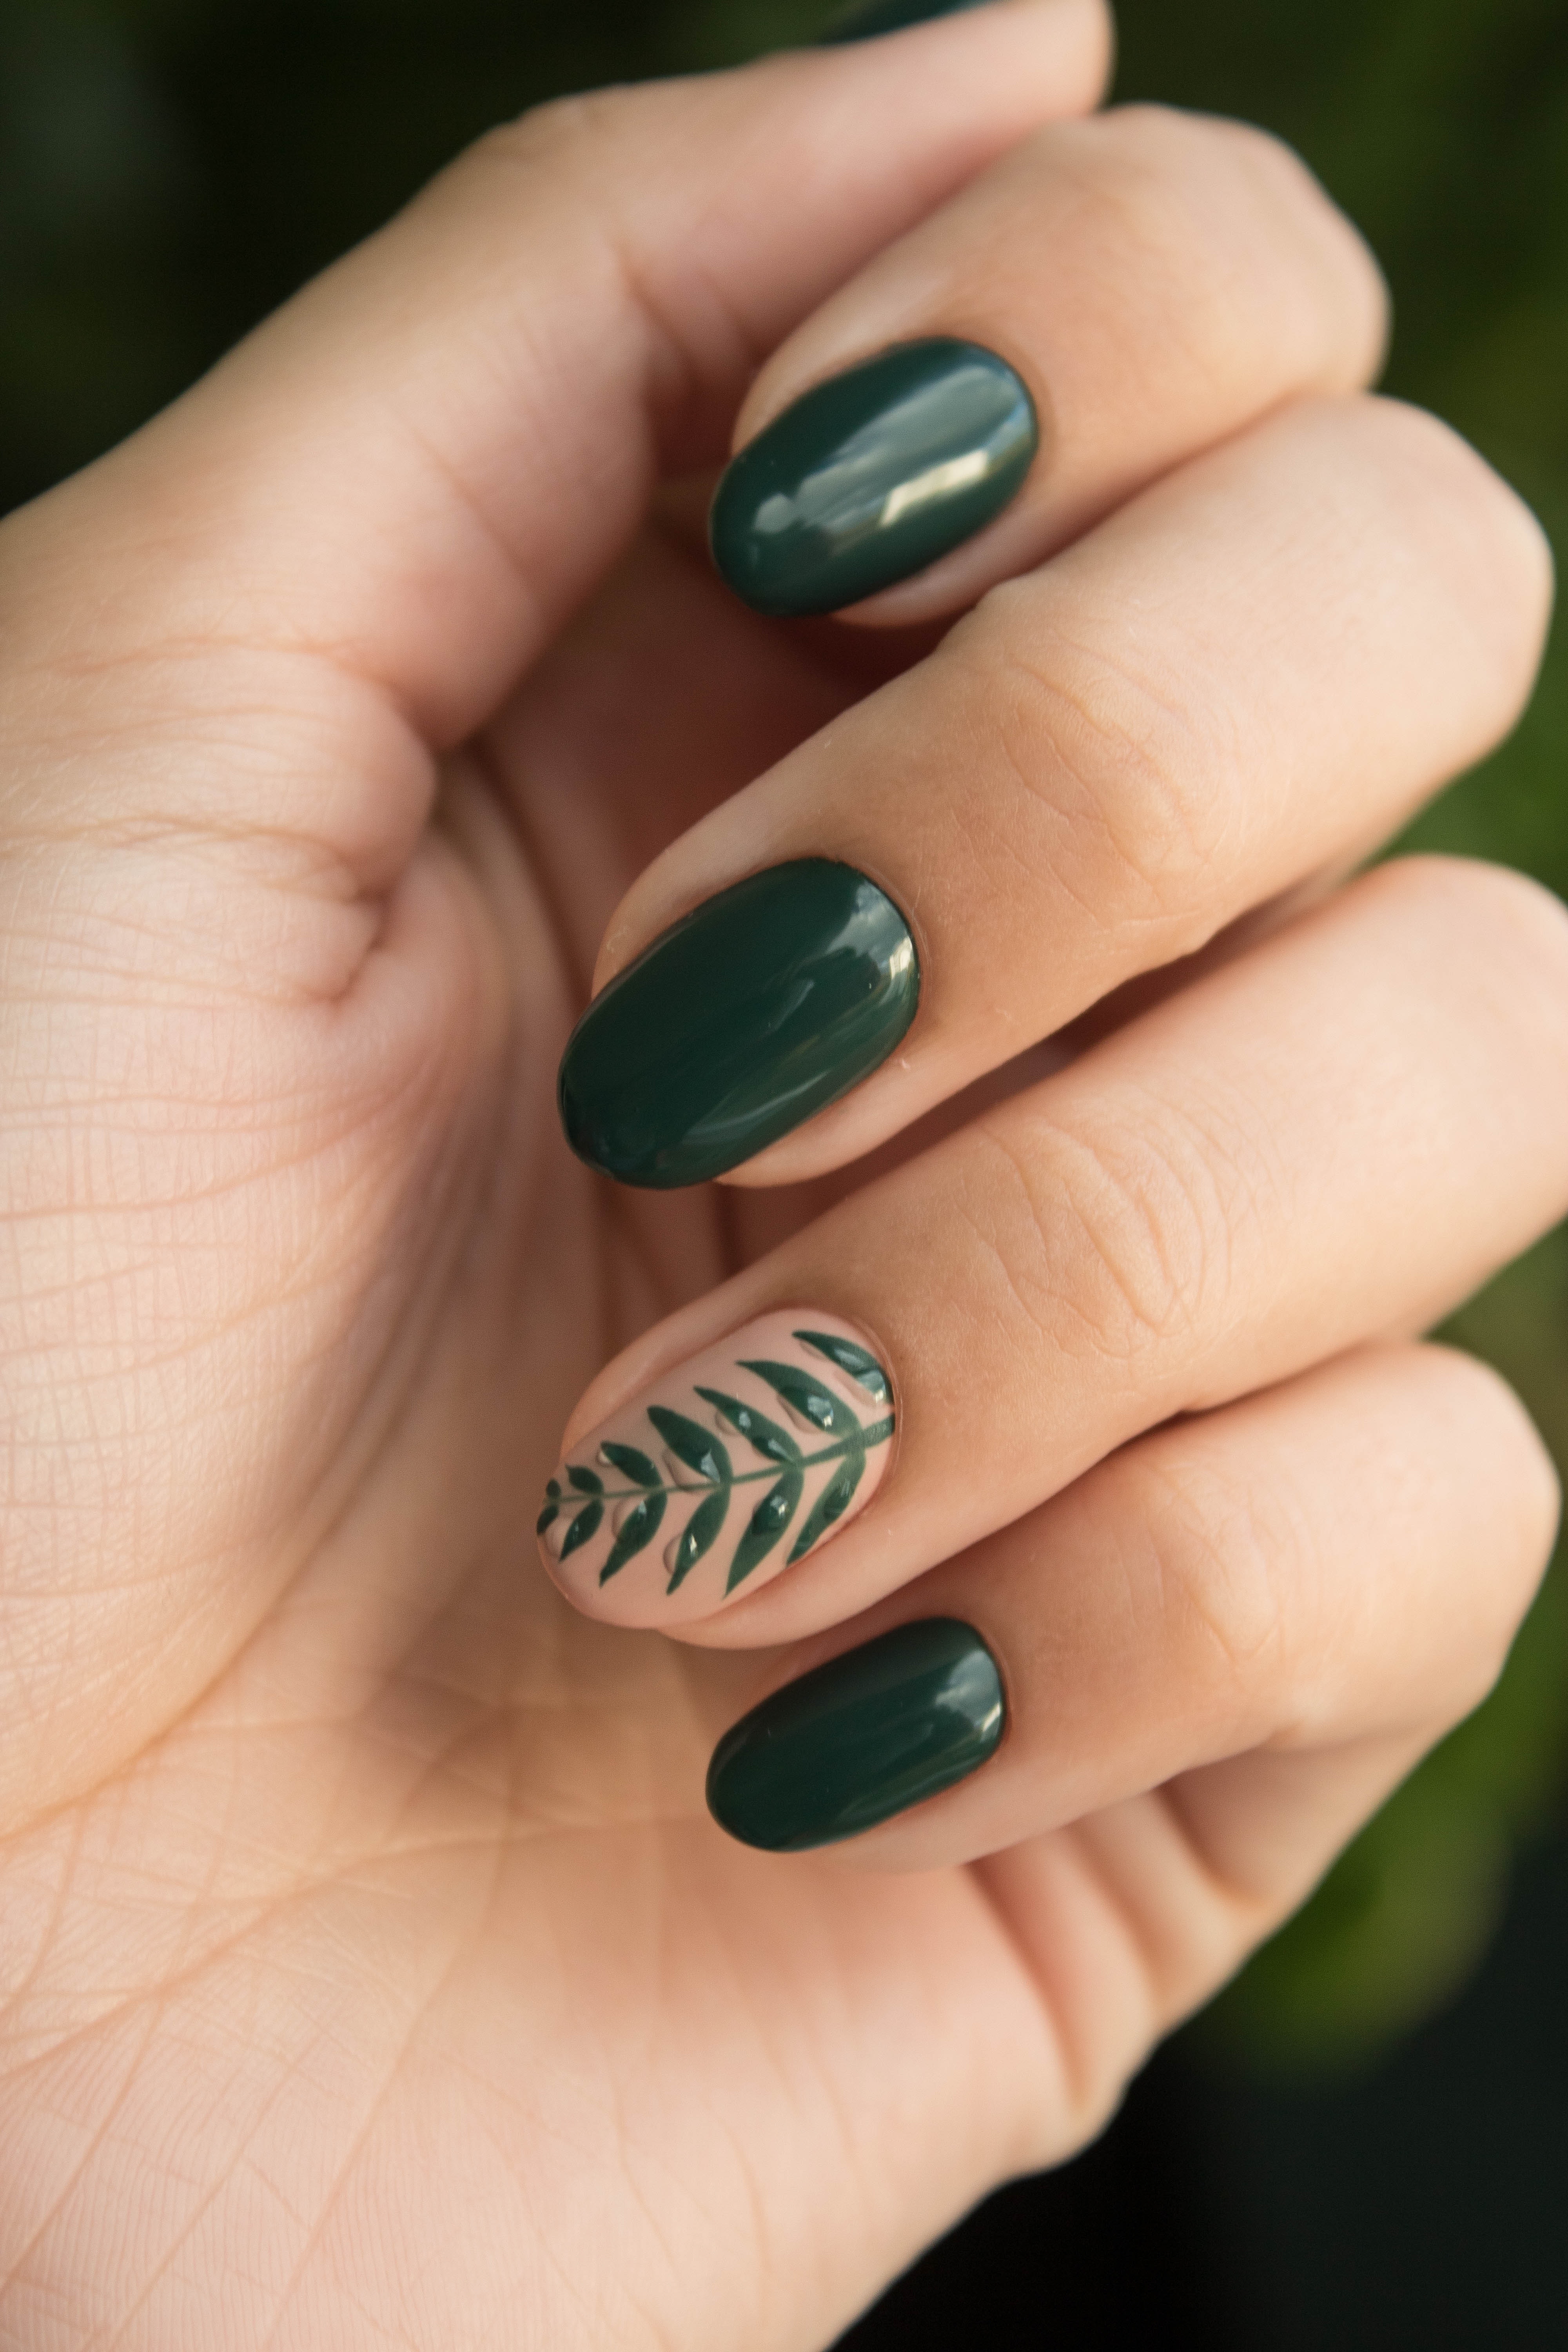 An close-up image of a well-manicured green nails. | Source: Pexels